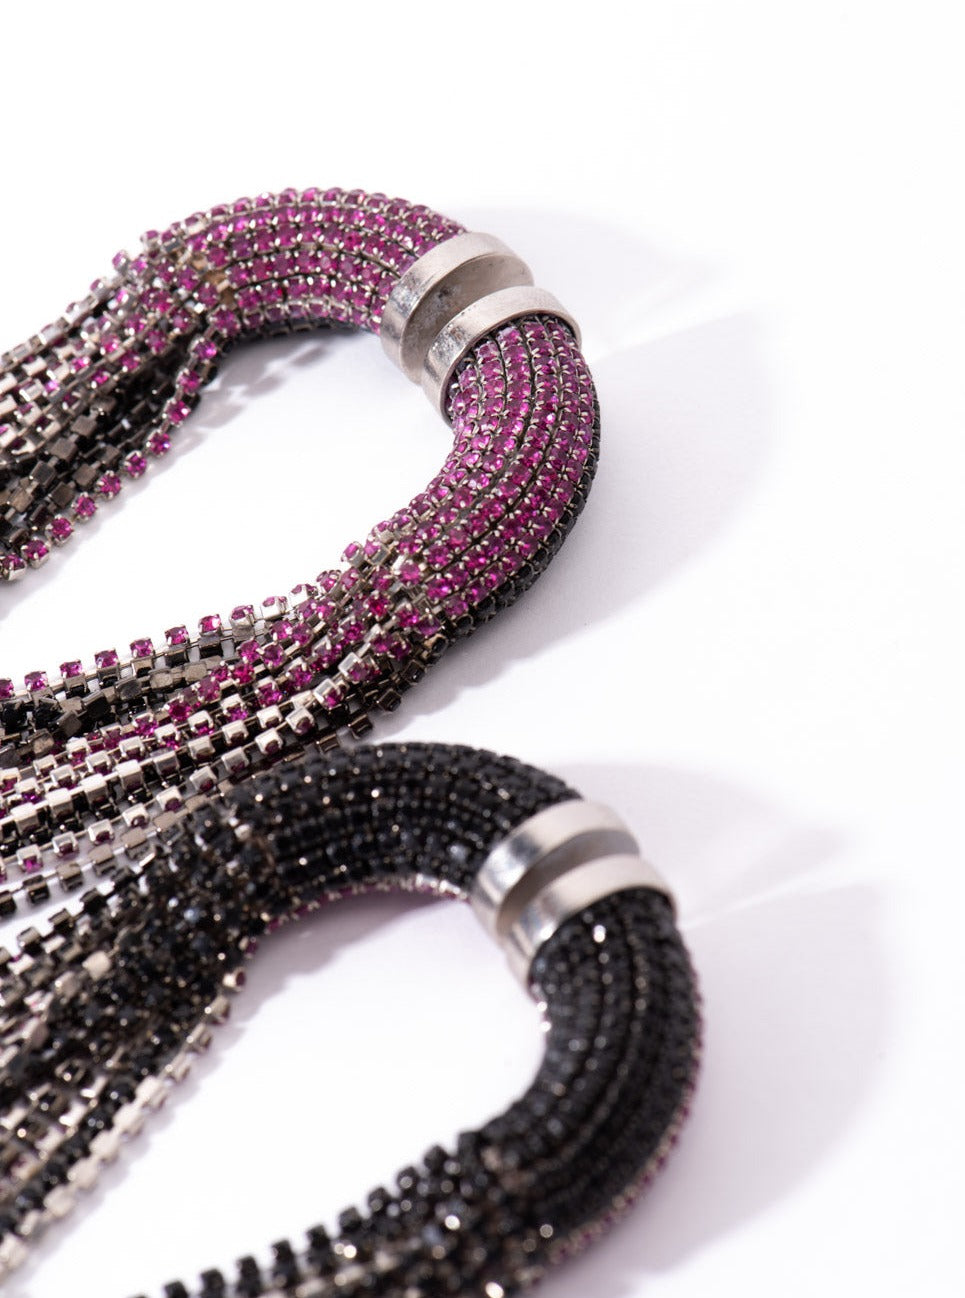 Amama,Infinity Fall Danglers in Black and Pink